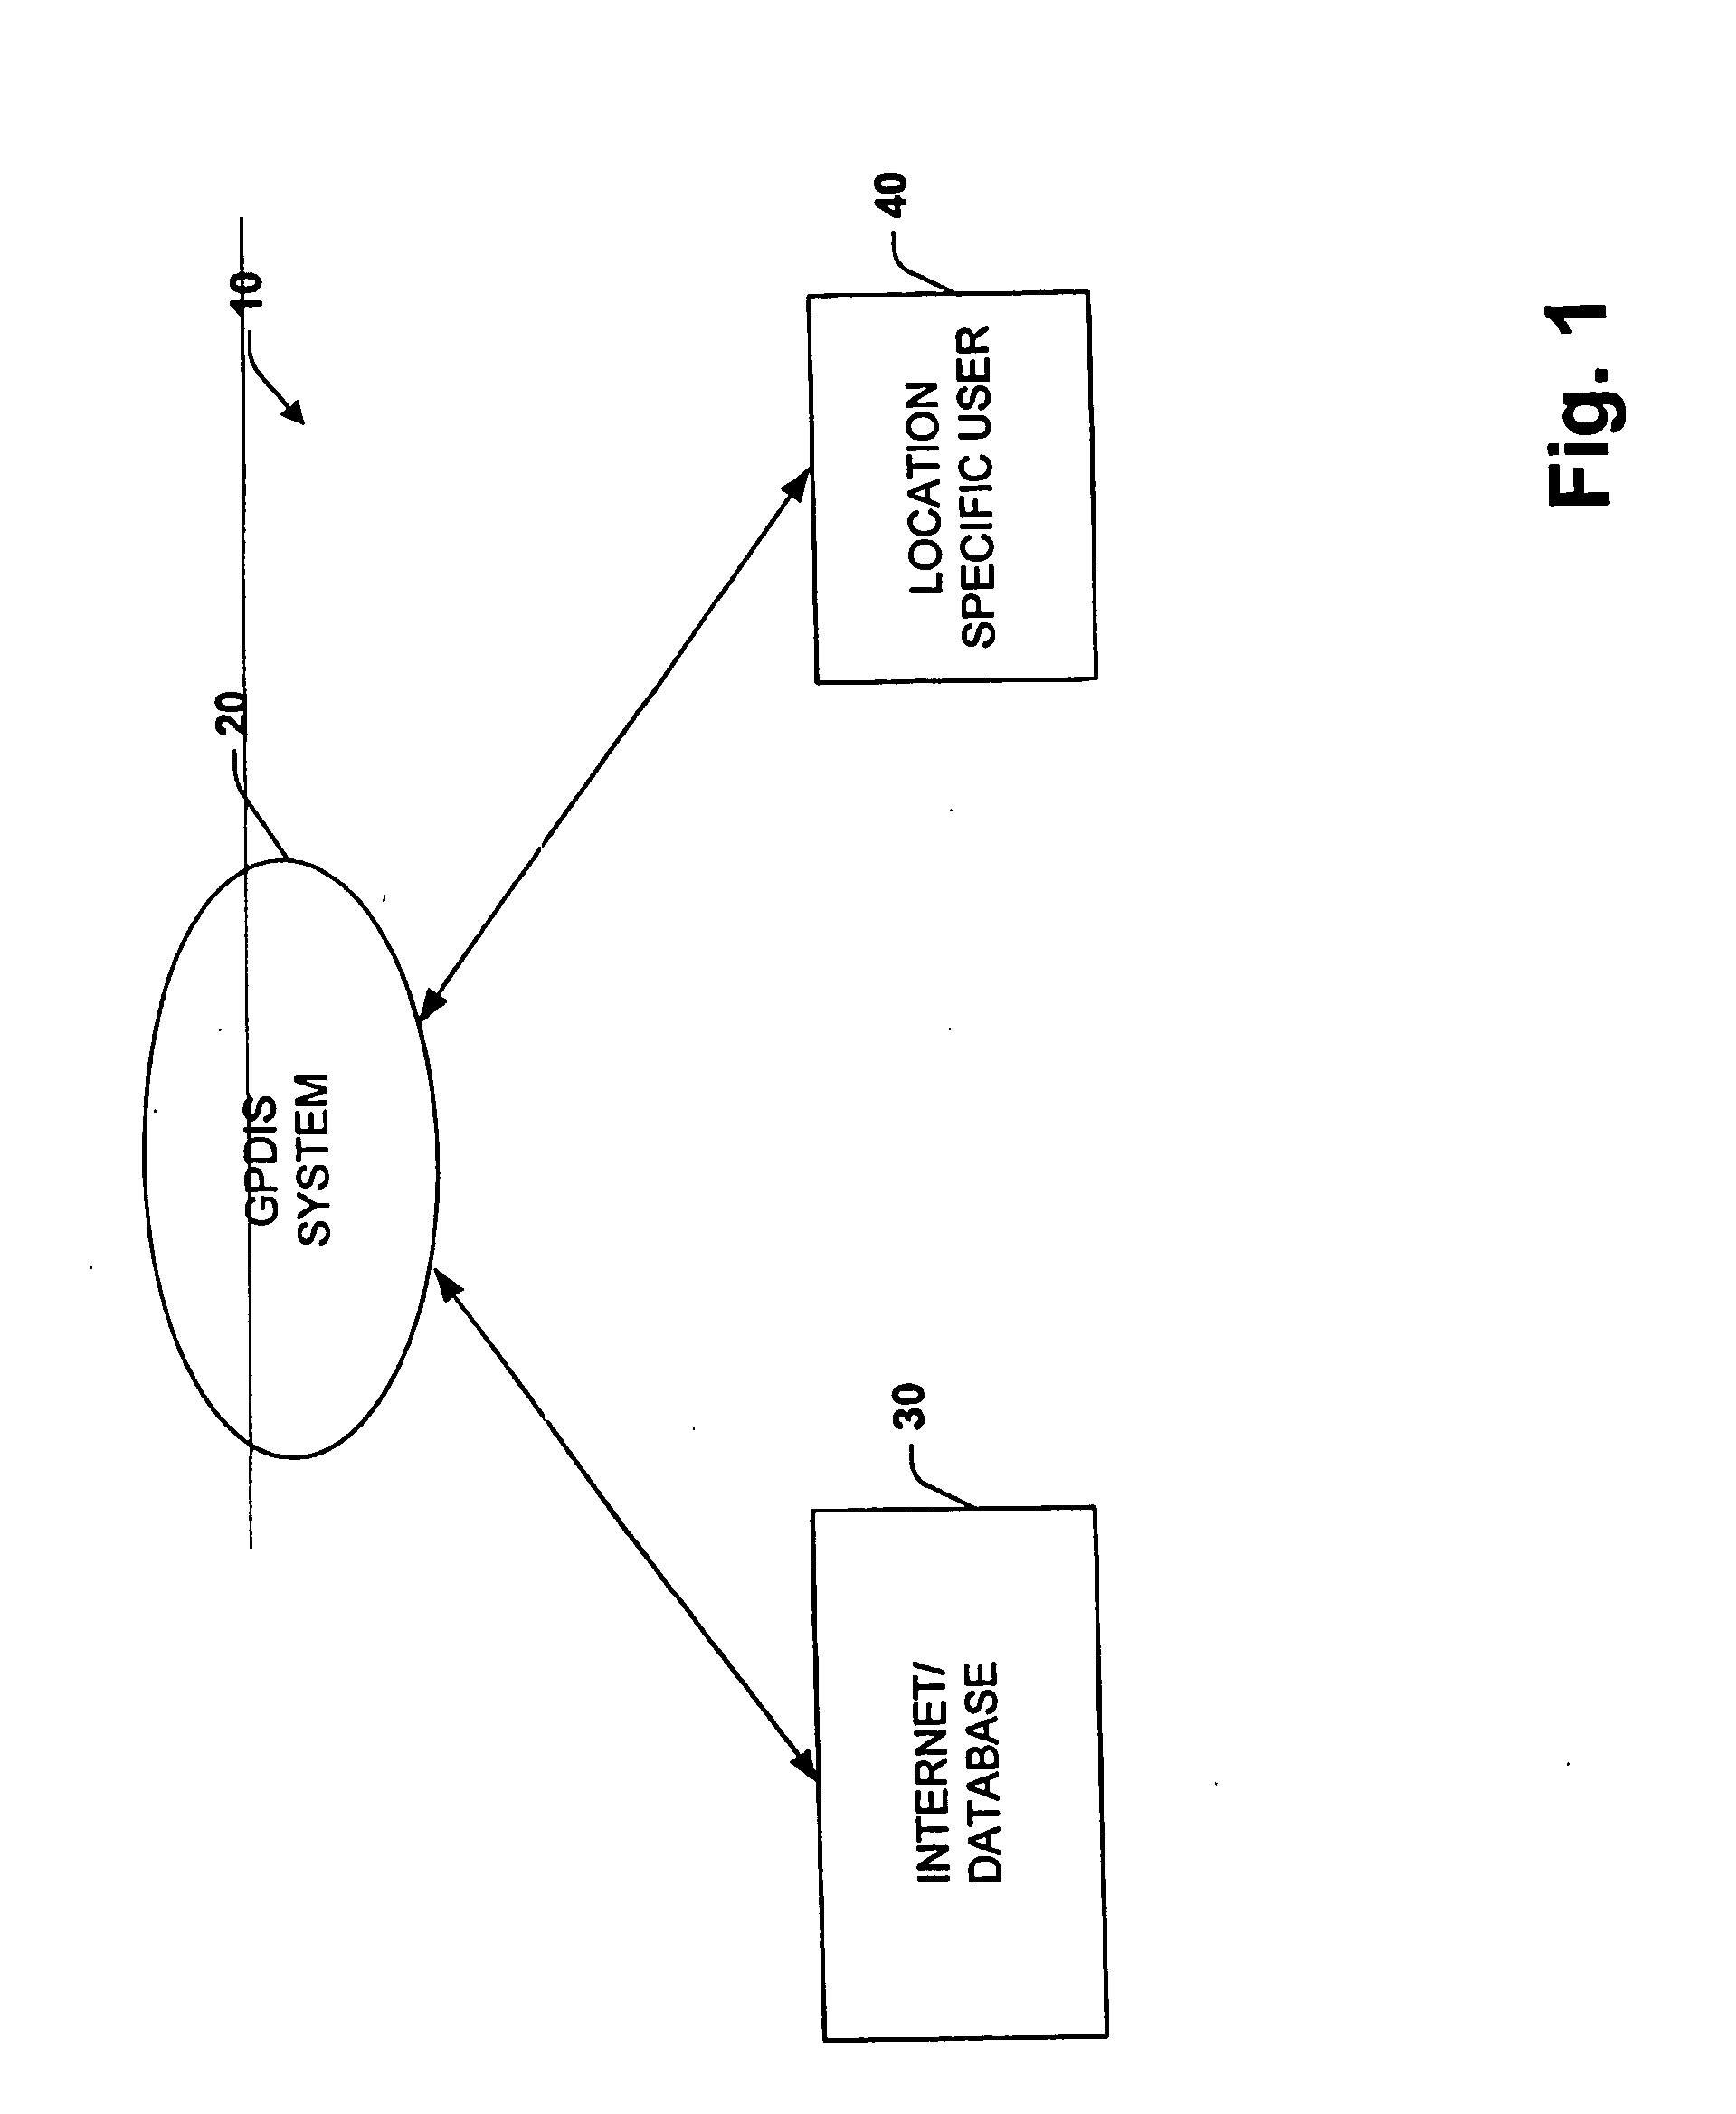 System for dynamically pushing information to a user utilizing global positioning system